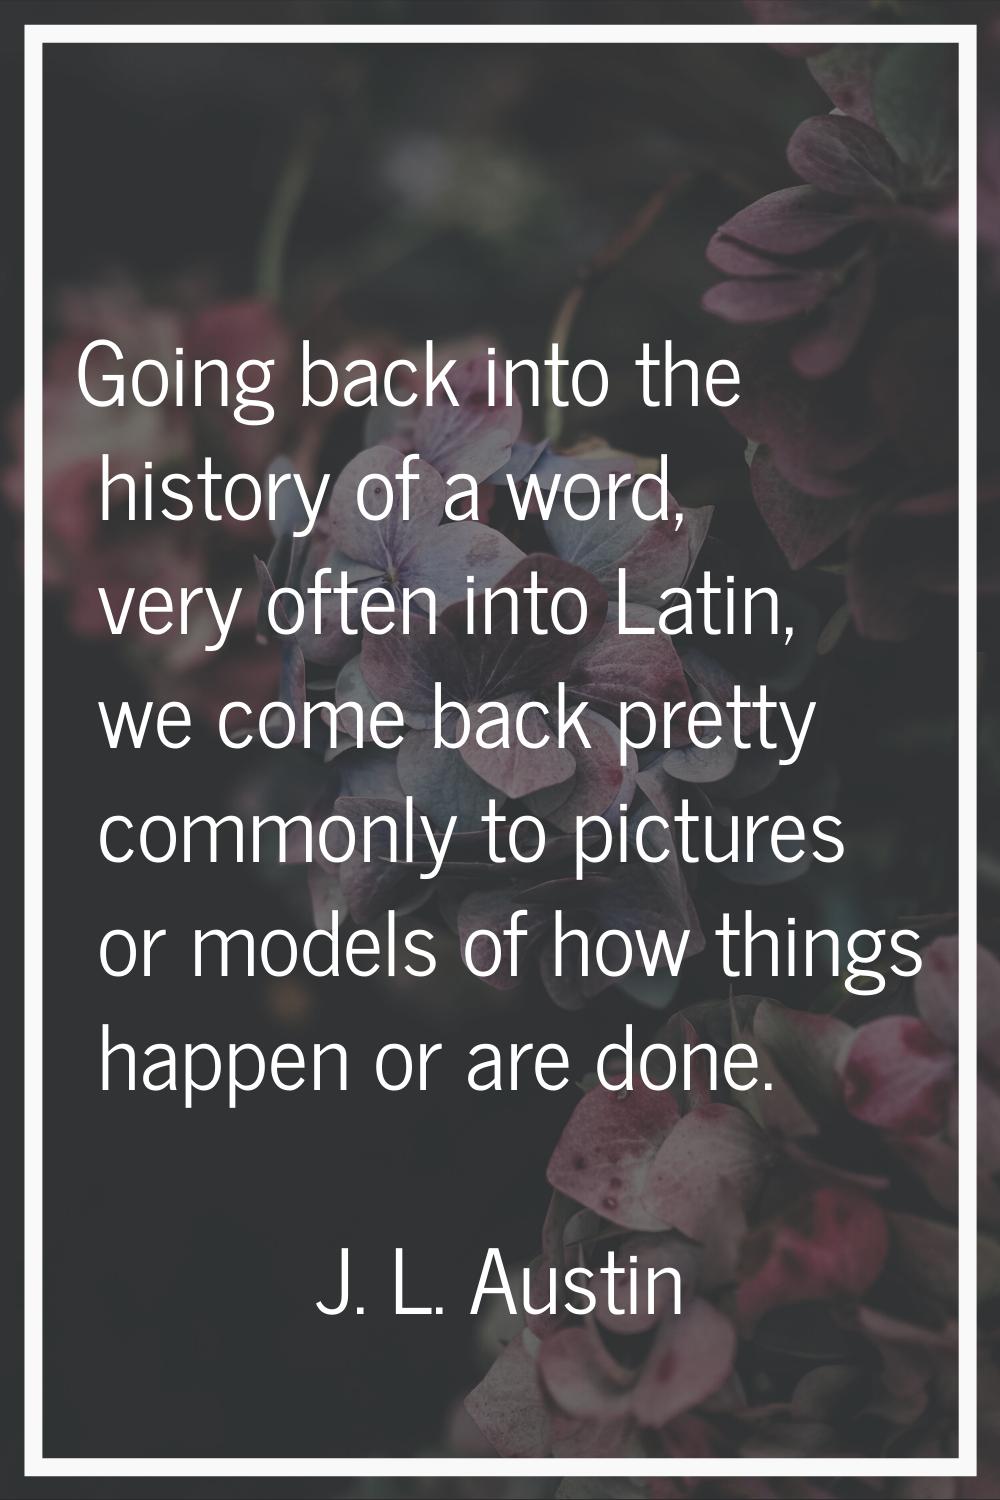 Going back into the history of a word, very often into Latin, we come back pretty commonly to pictu